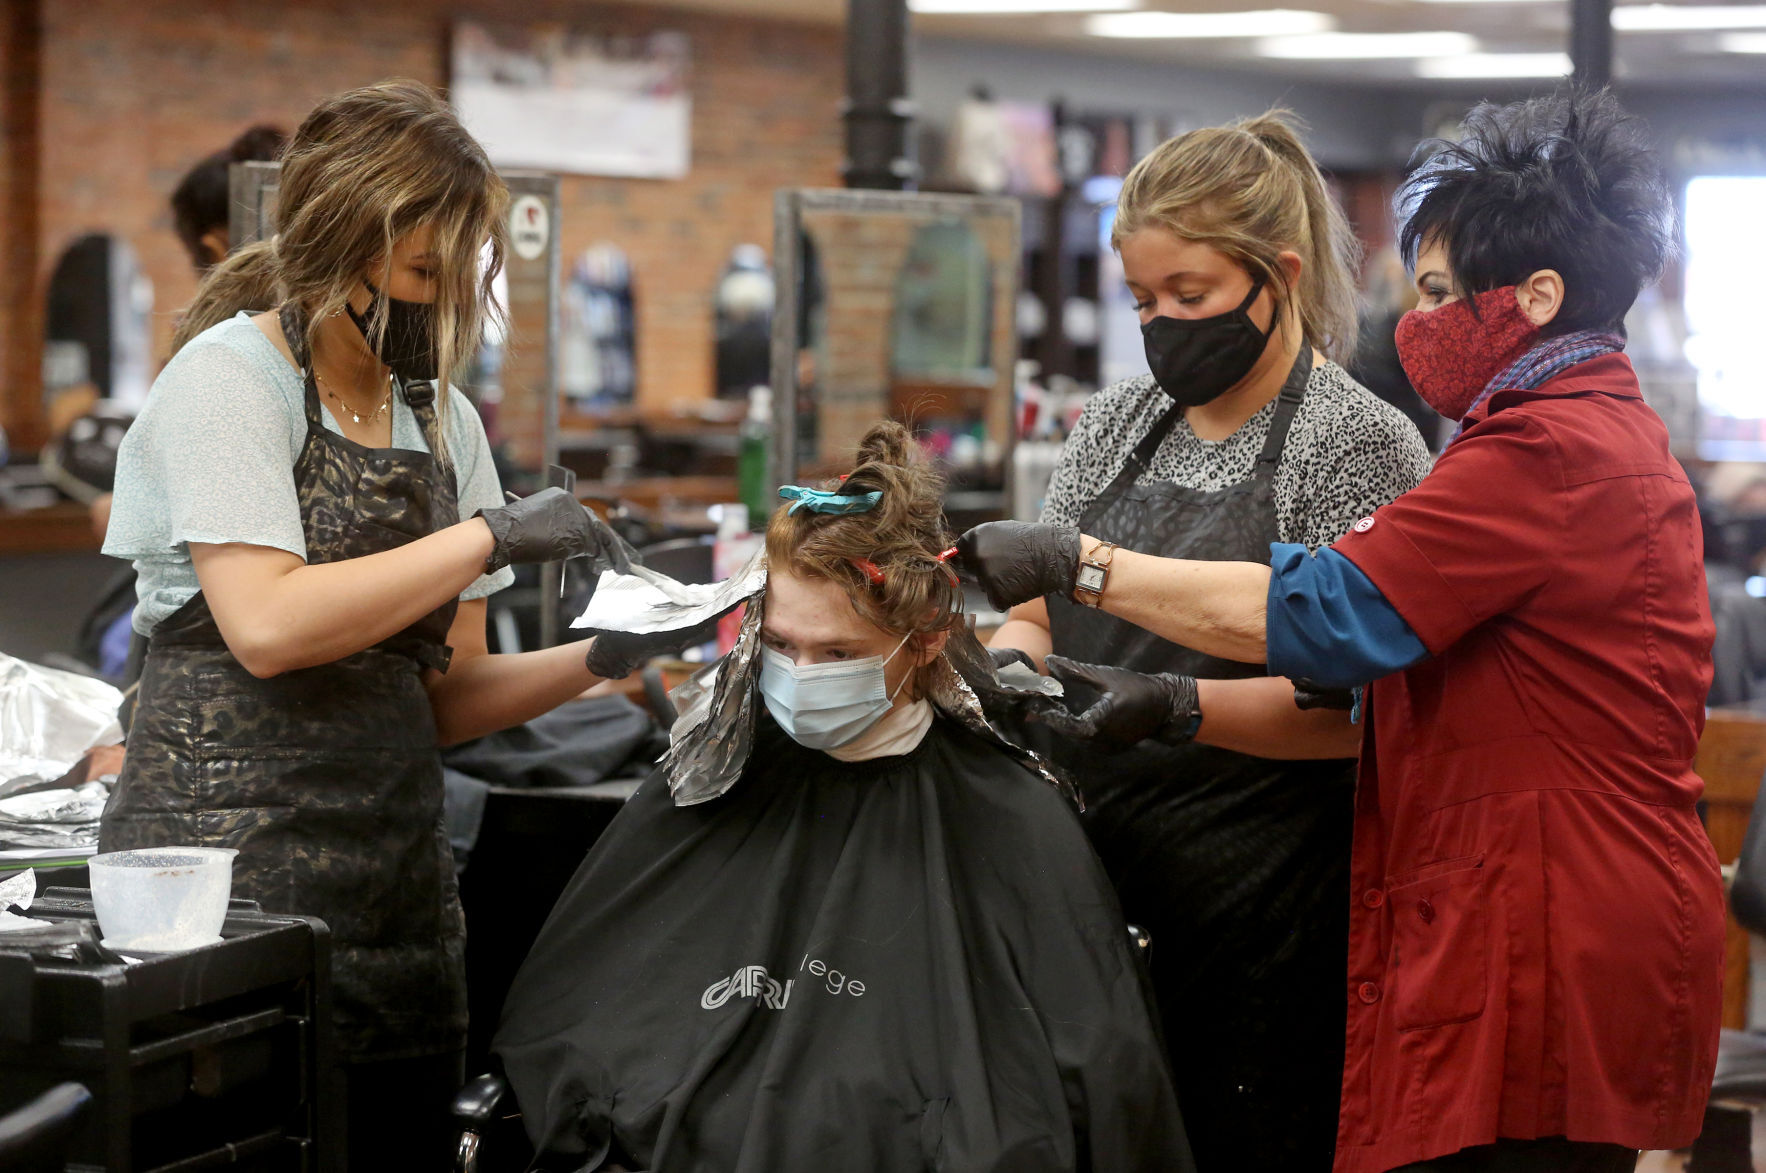 Capri College students Lexie Brandt (left) and Shelby Duehr (second from right) and instructor Diana Bonifas apply a hair color to Dwight Lloyd, of Hanover, Ill., at Capri in Dubuque on Thursday. PHOTO CREDIT: JESSICA REILLY